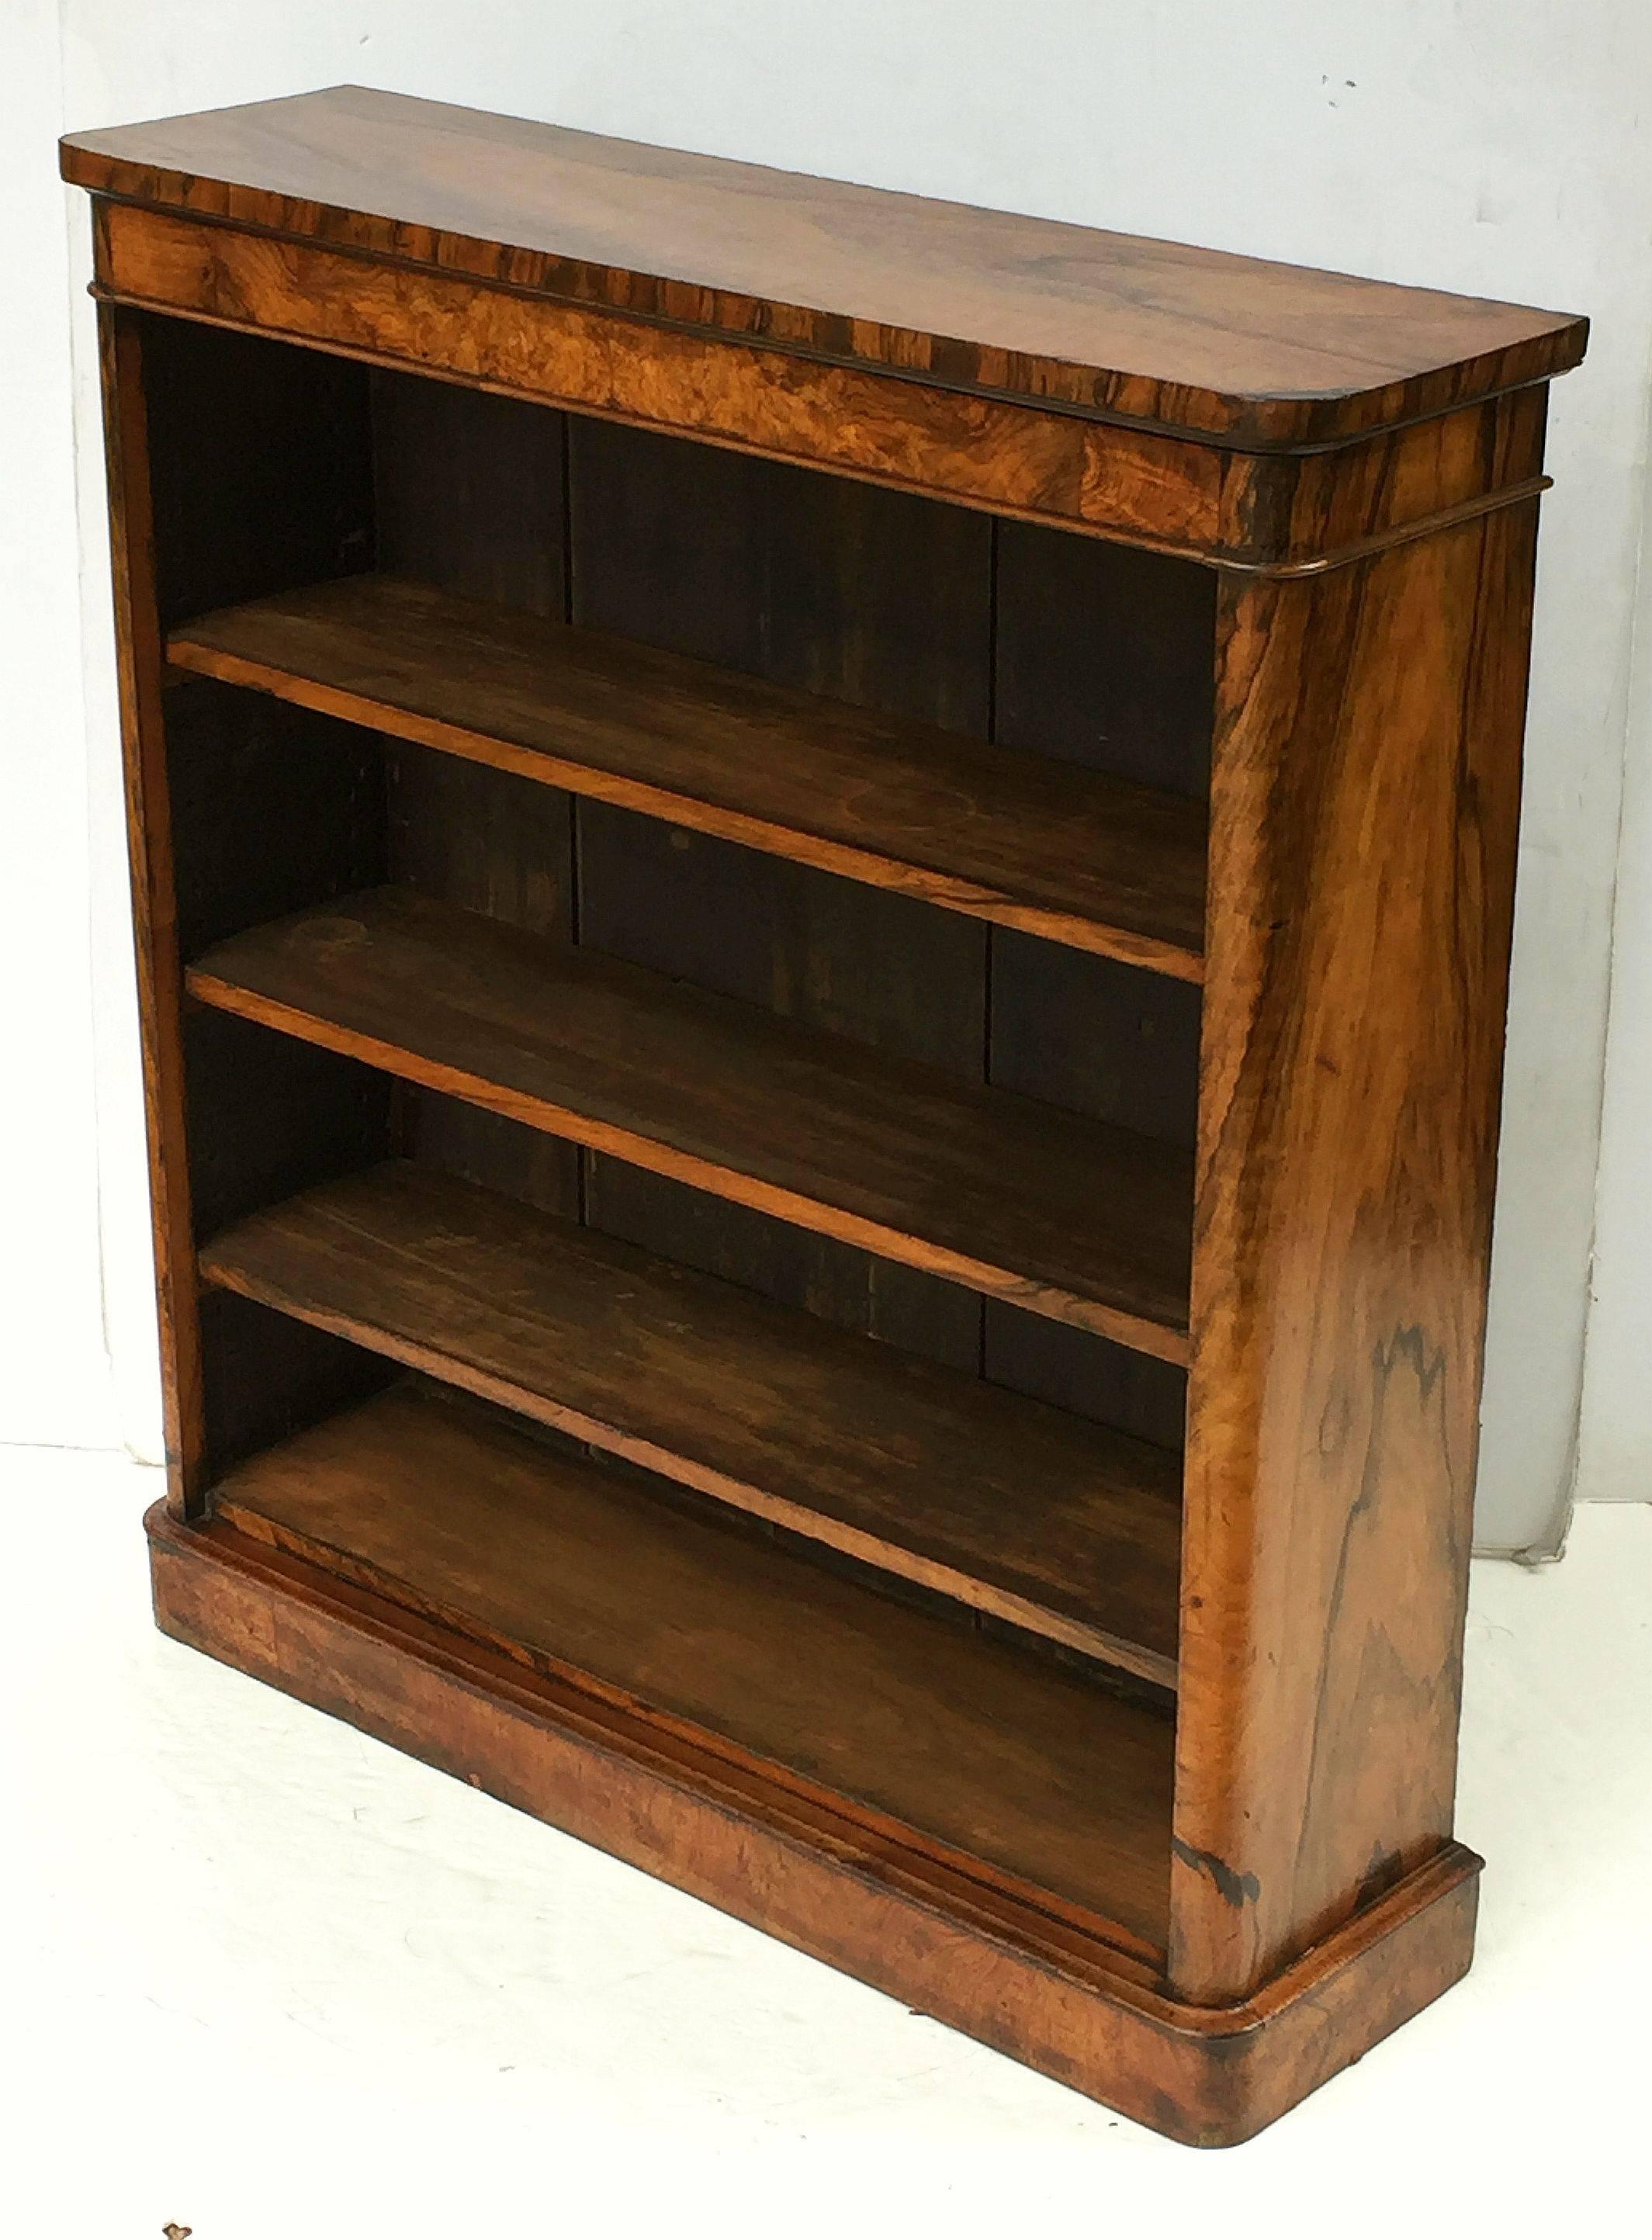 A fine English open bookcase of figured burr walnut featuring a moulded top over a frieze of three adjustable shelves and a plinth base.